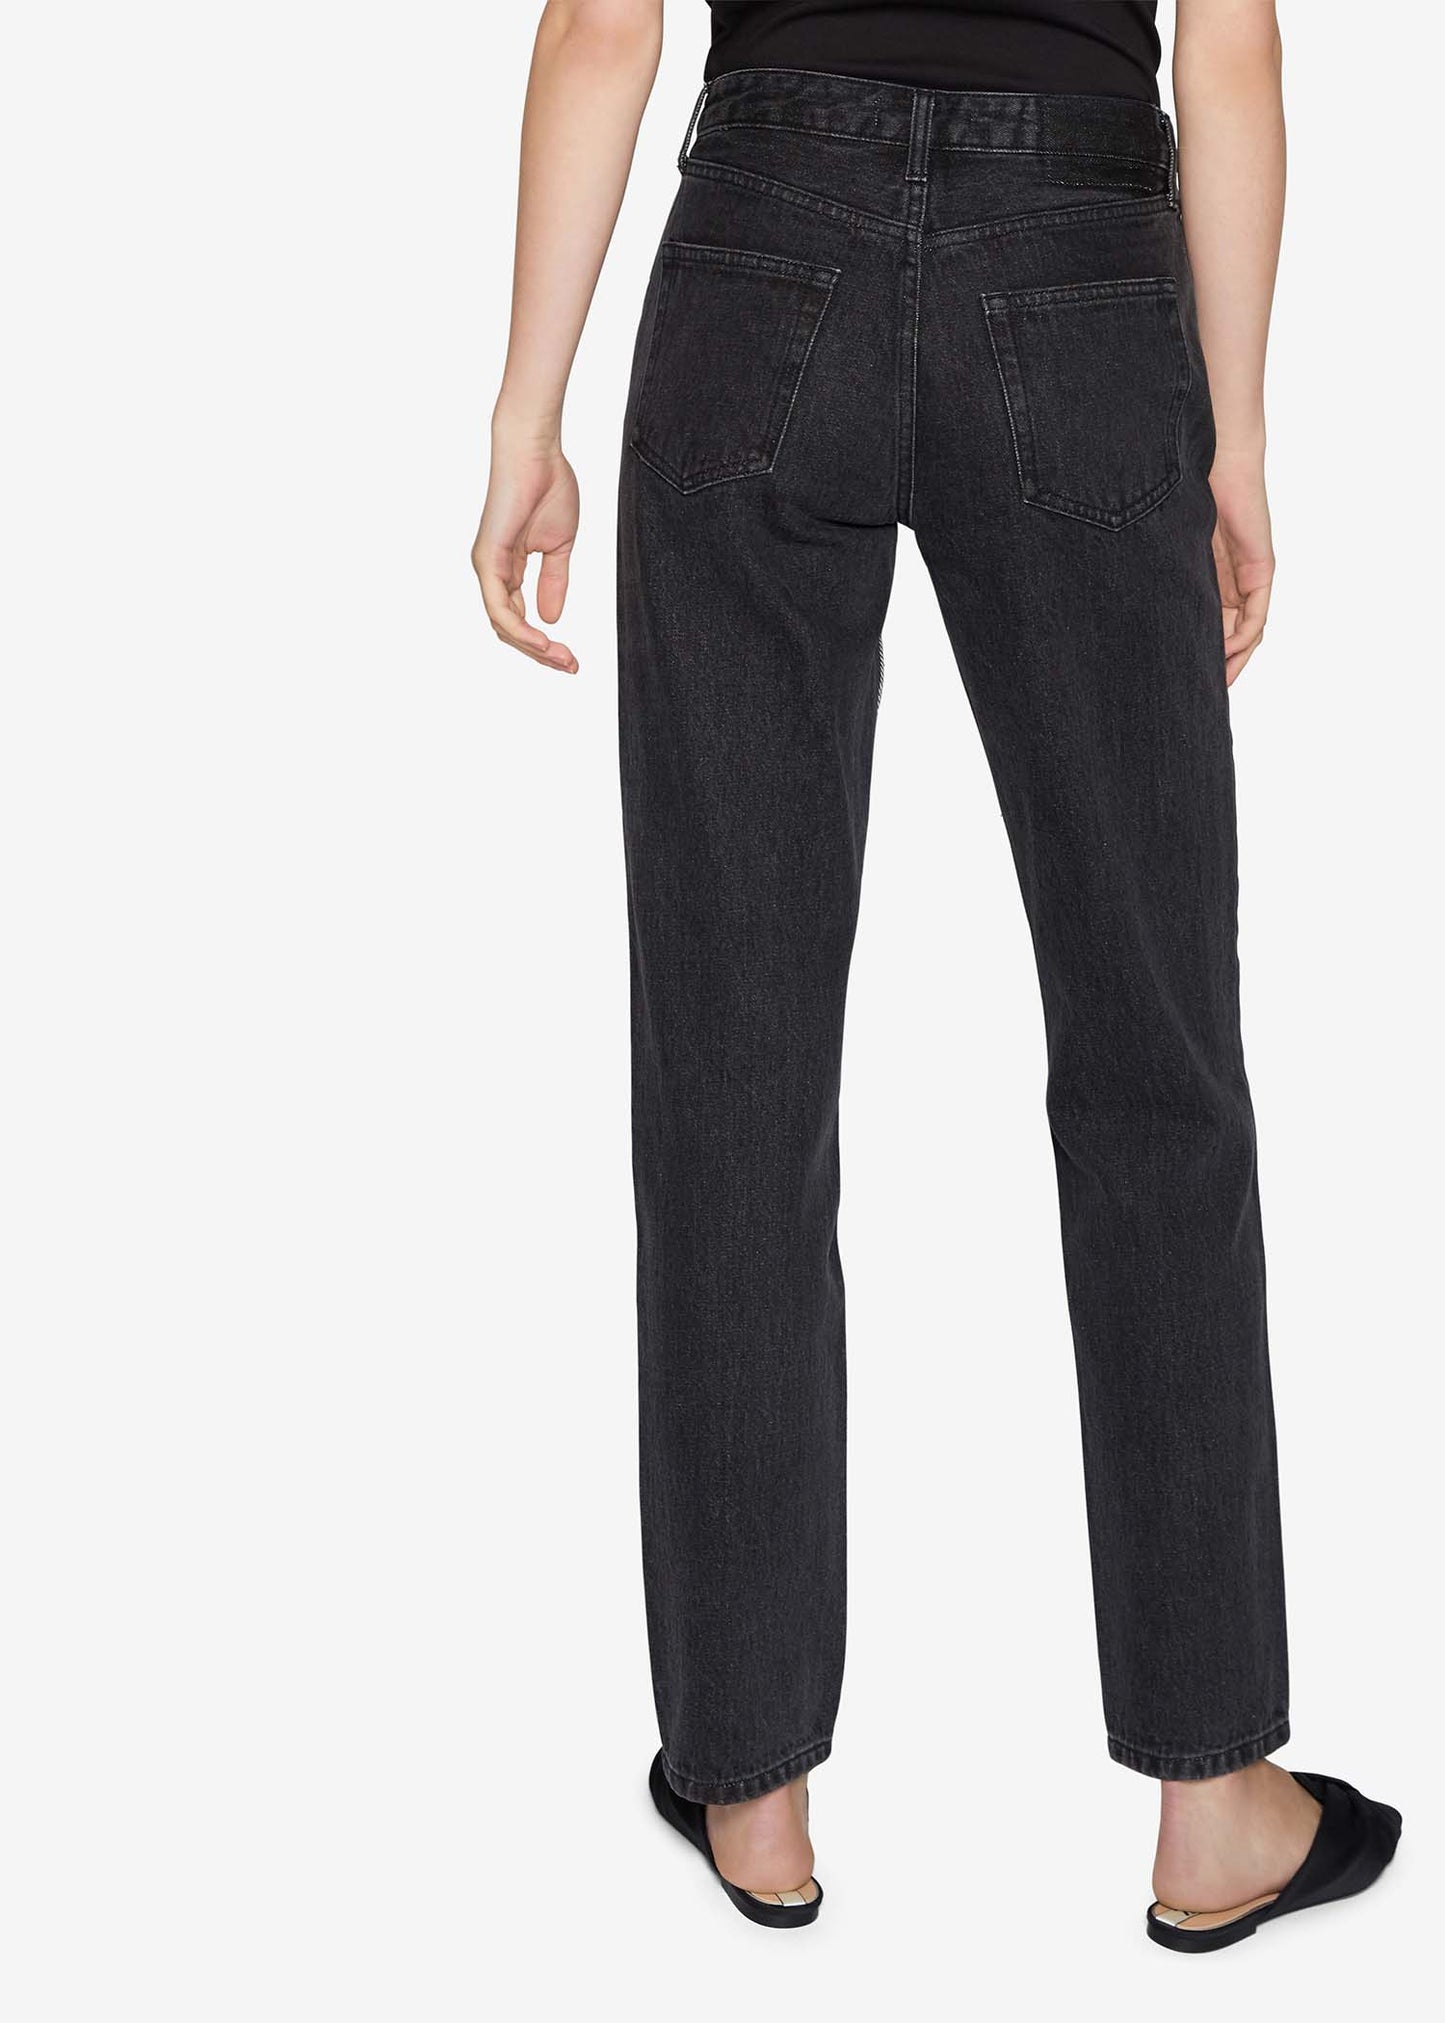 Inside Out Straight-Leg Jeans